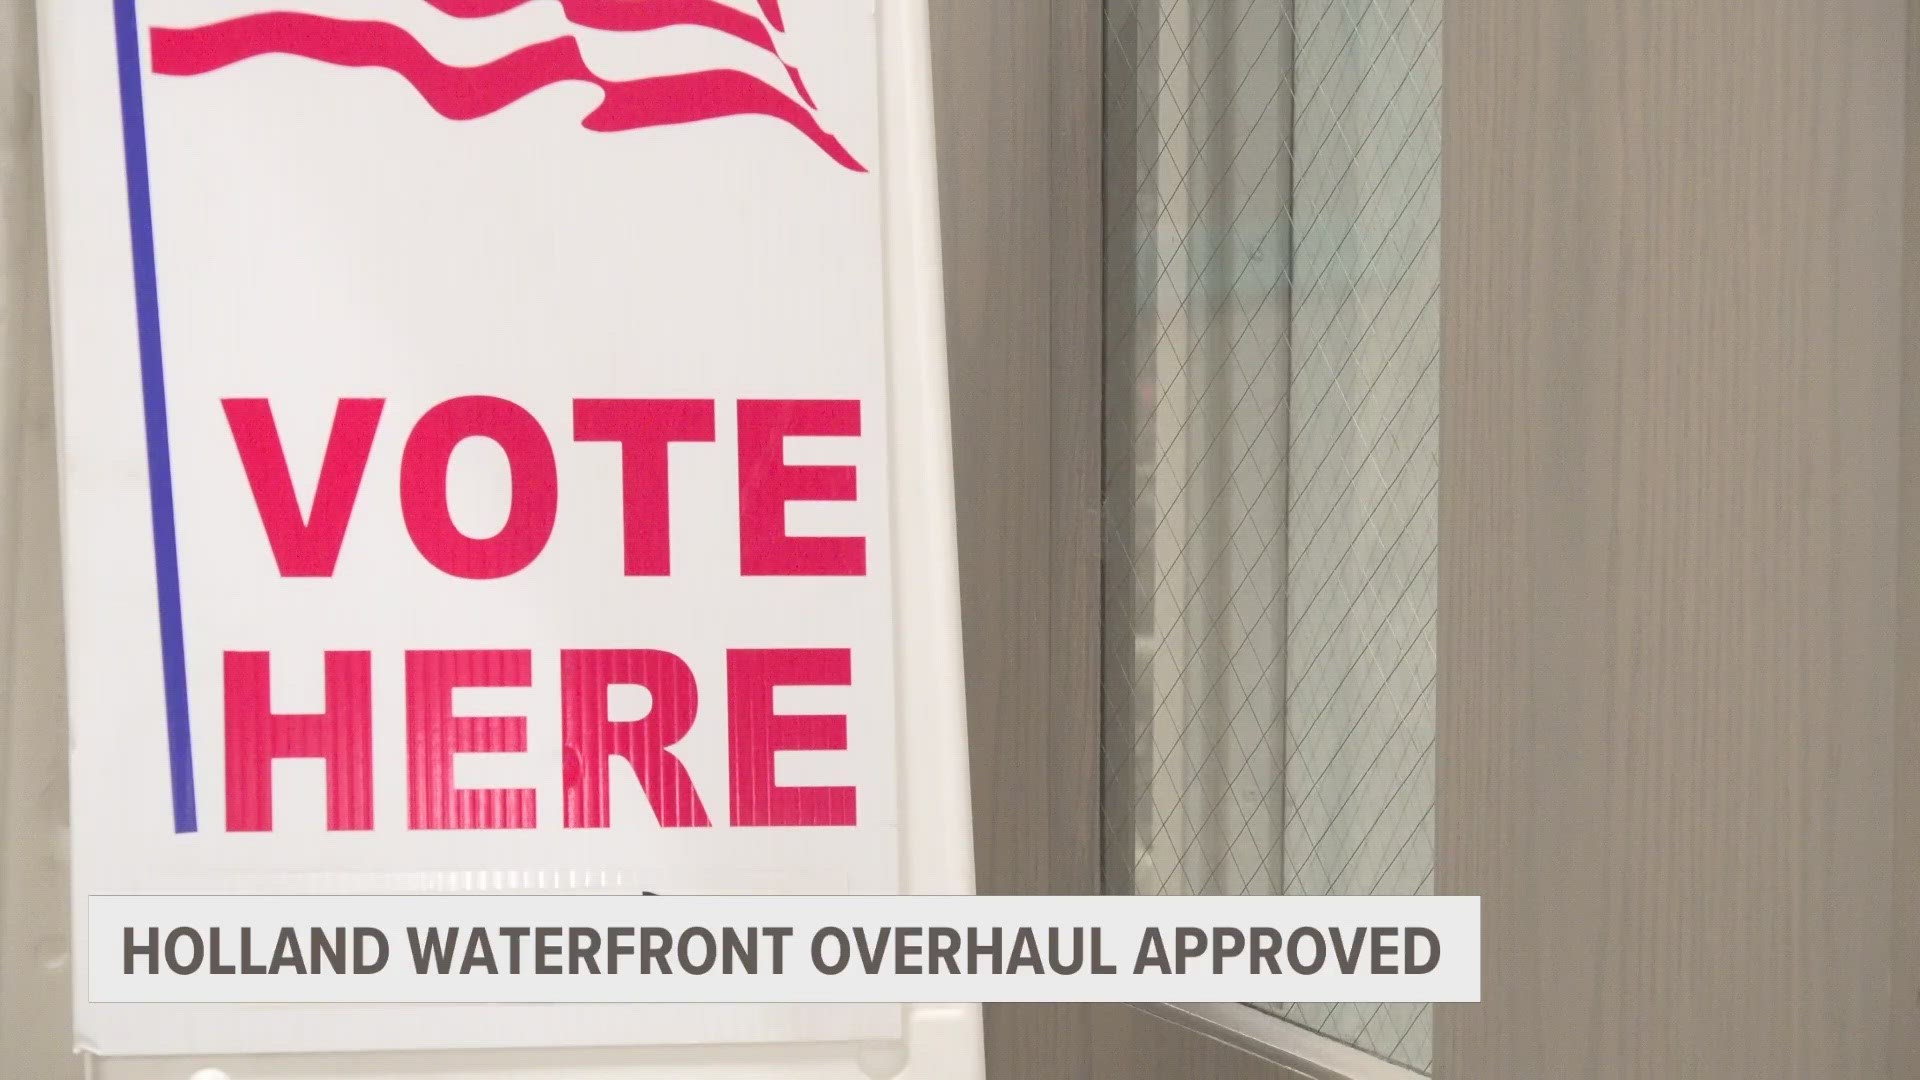 Here's what West Michigan voters approved and rejected in the major elections Tuesday.